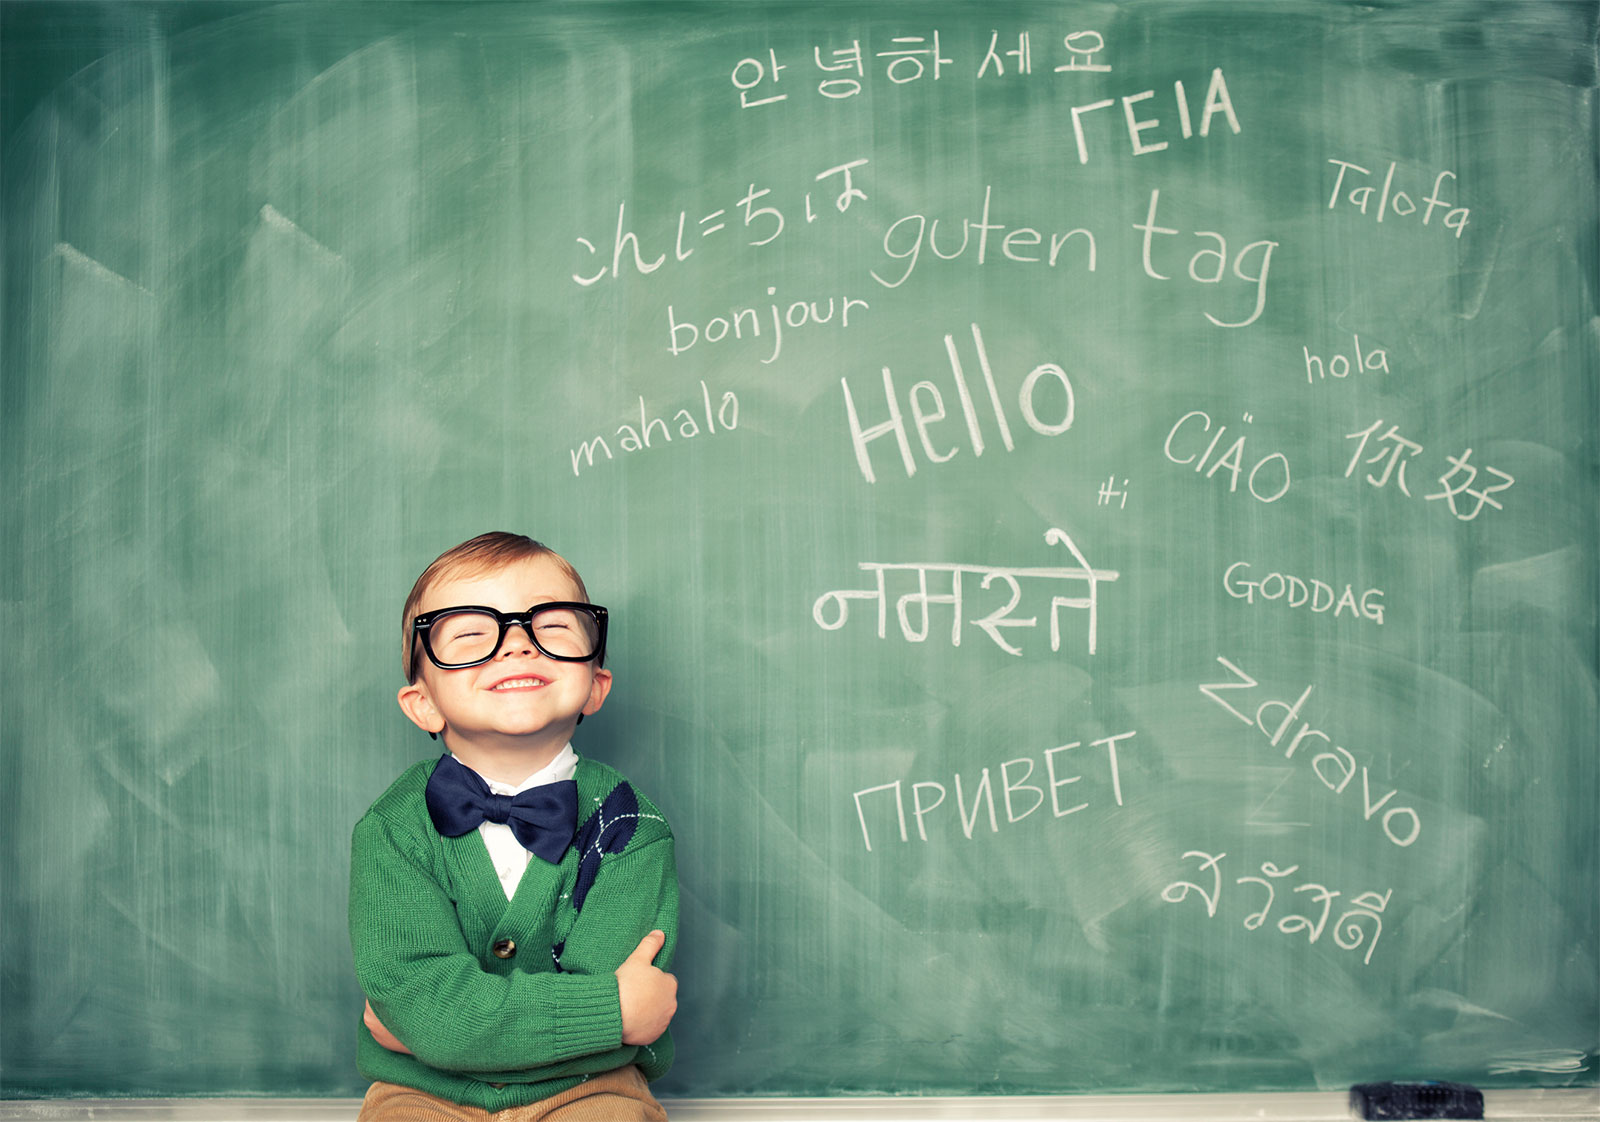 Wanna Know If You Have Enough General Knowledge? Take This Quiz to Find Out languages 2